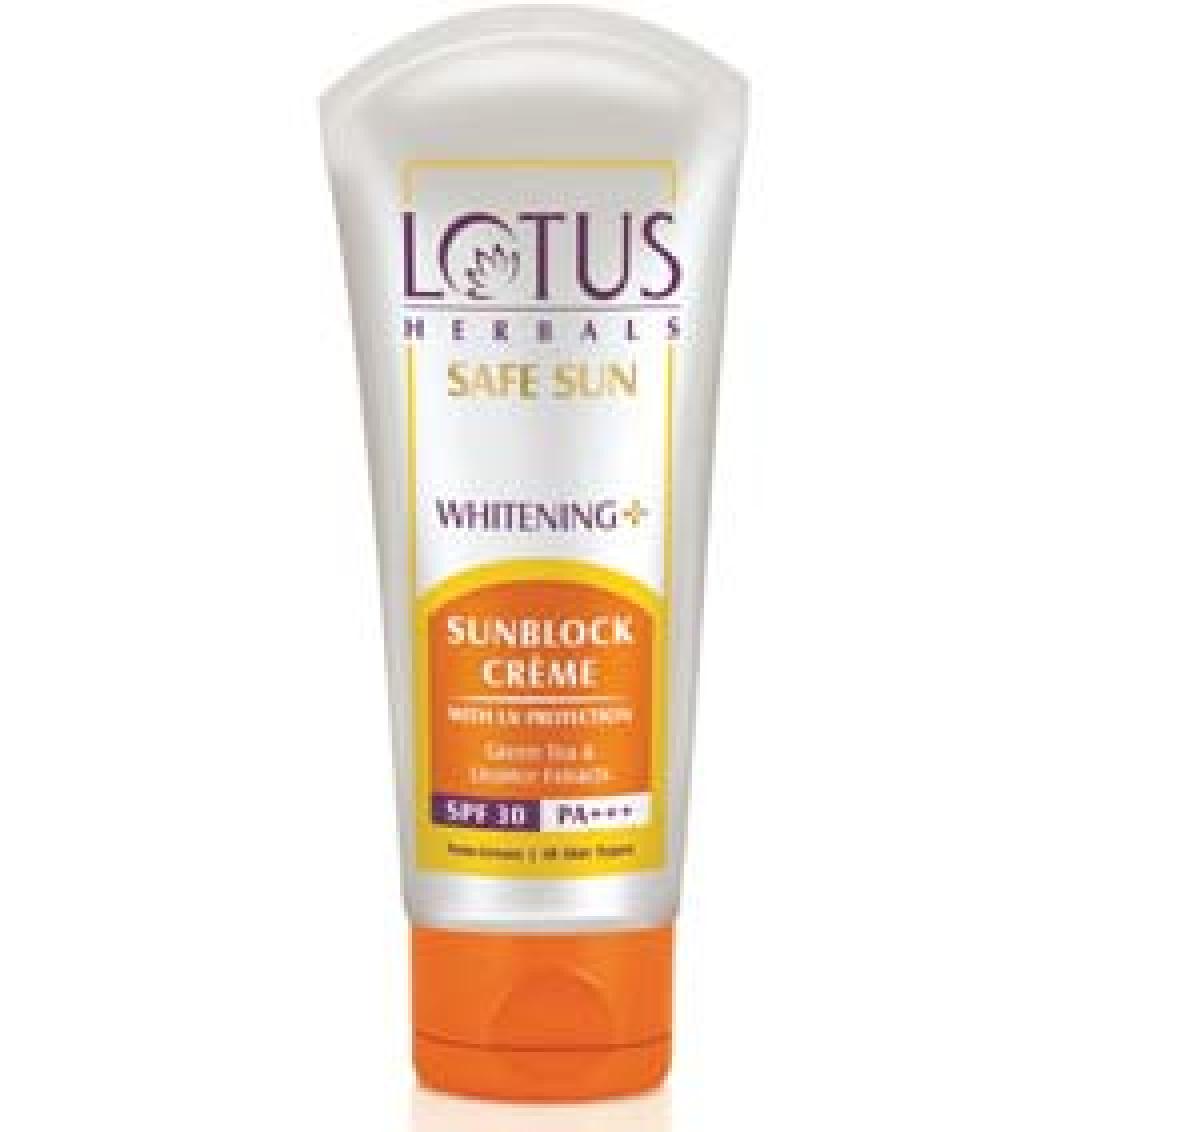 New range of sunscreen from Lotus